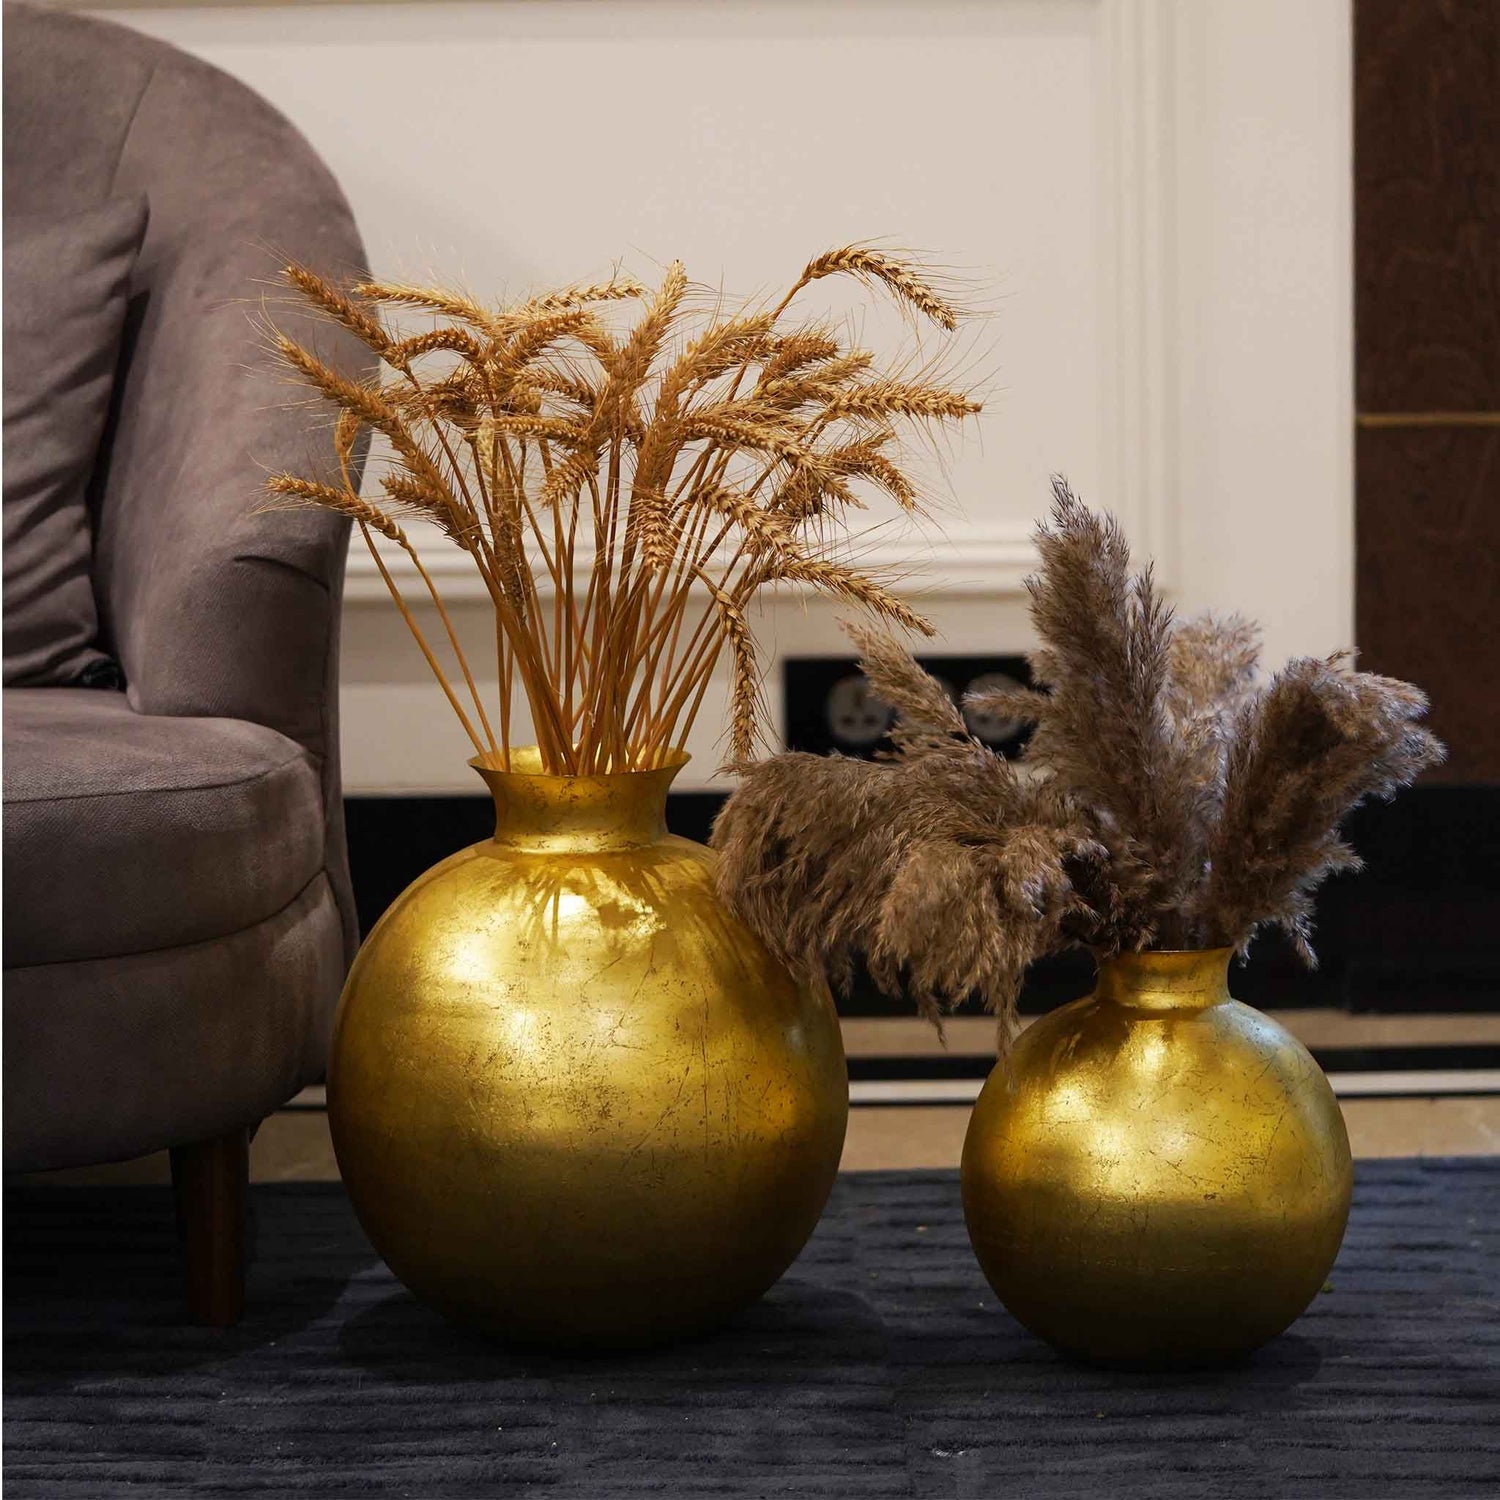 Two large metallic golden pot-shape vases placed on the floor.